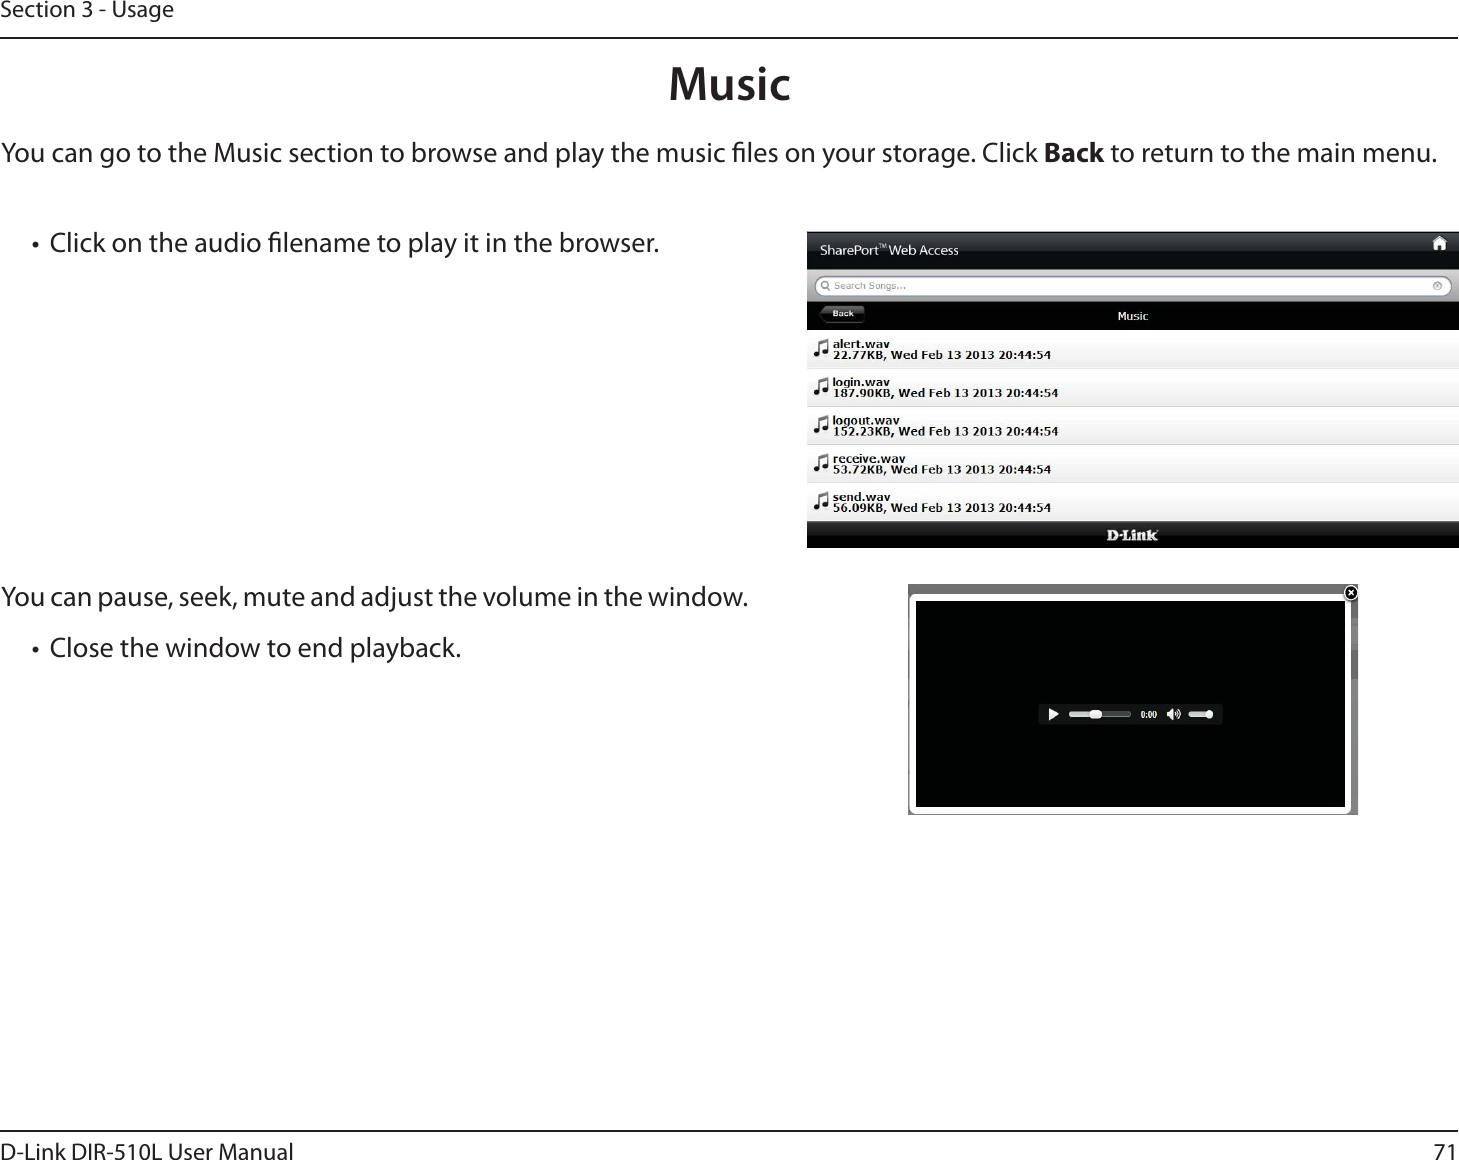 71D-Link DIR-510L User ManualSection 3 - UsageMusicYou can go to the Music section to browse and play the music les on your storage. Click Back to return to the main menu.t Click on the audio lename to play it in the browser.You can pause, seek, mute and adjust the volume in the window.t Close the window to end playback.